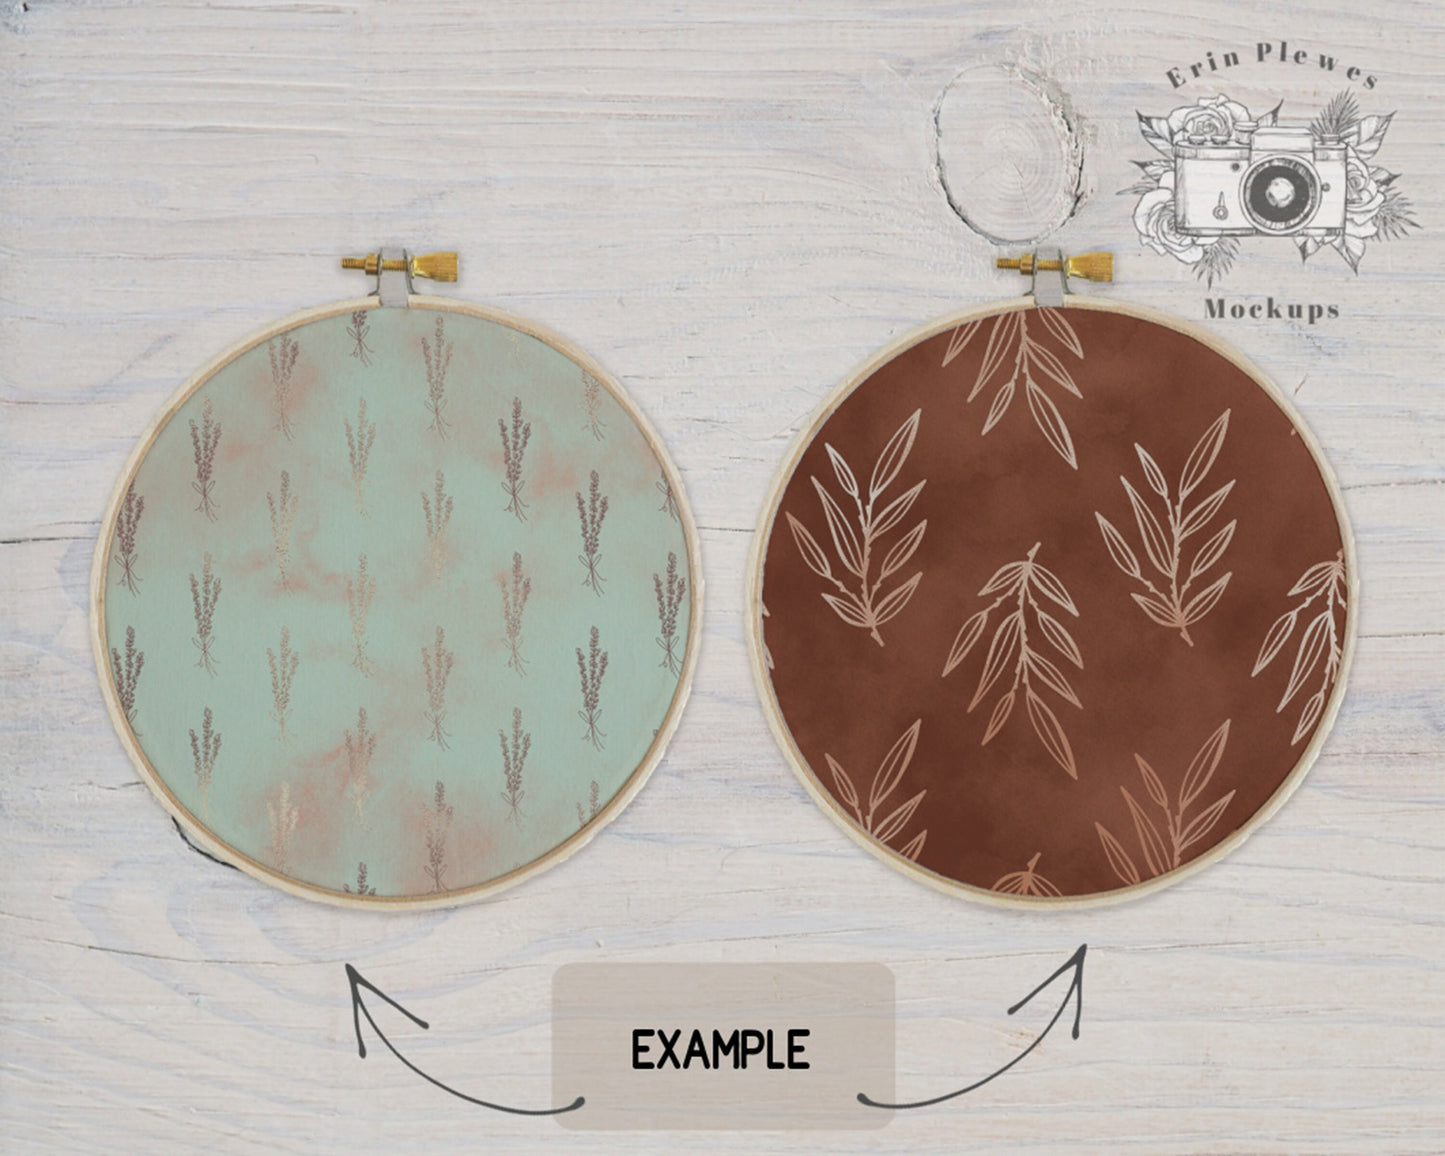 Embroidery Hoop Mockup Set , Cross Stitch Mock Up on rustic white wood, Sewing Mock-up, JPG PNG PSD Smart Object, Digital Download Template